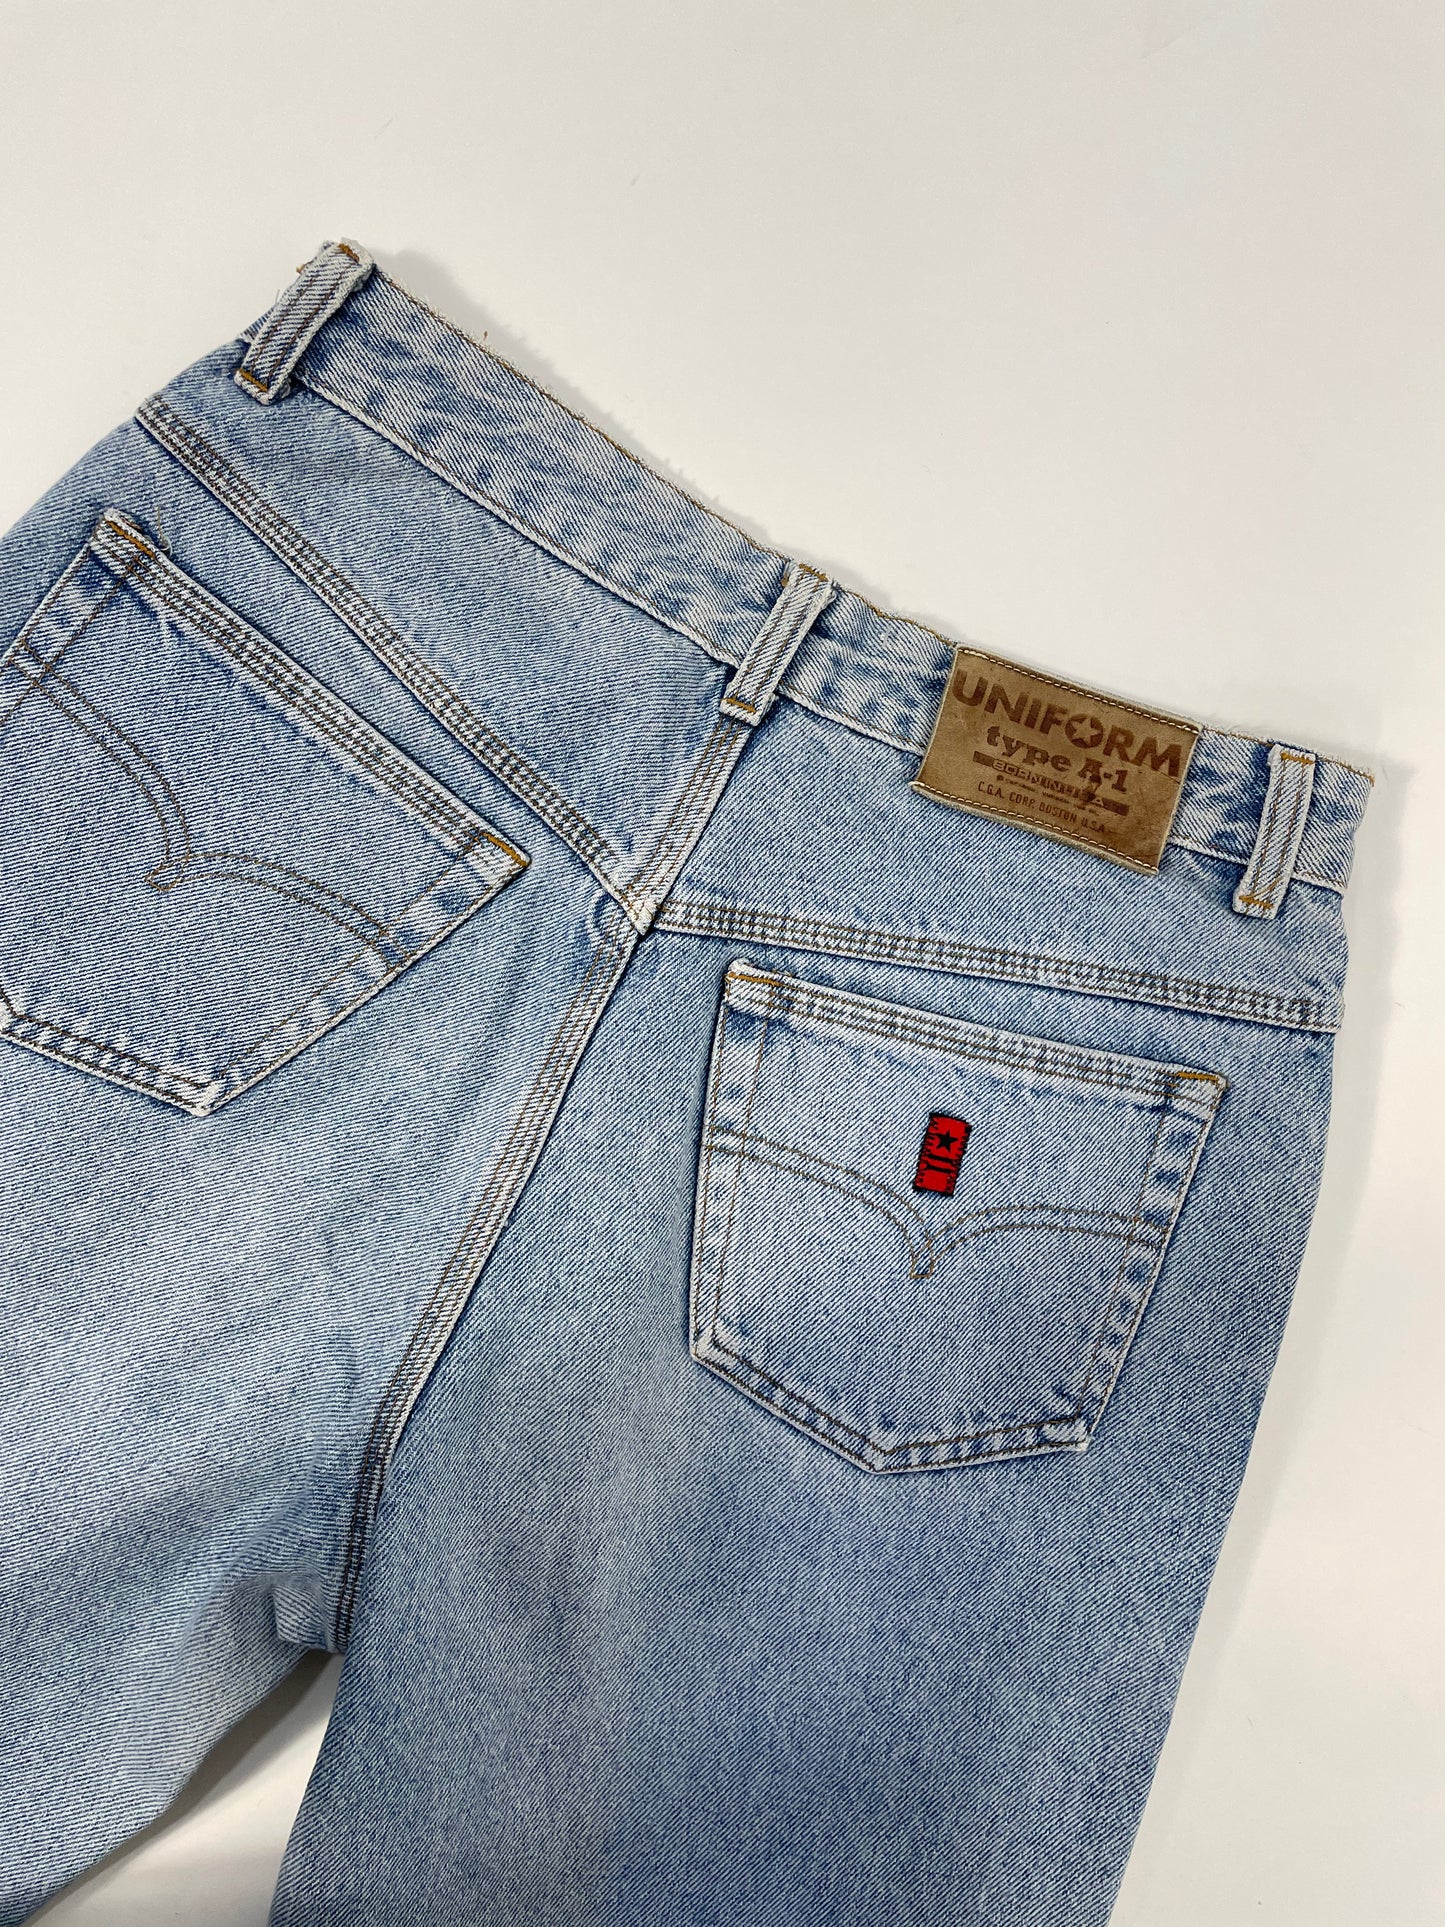 Jeans Uniform Type A-1 made in USA